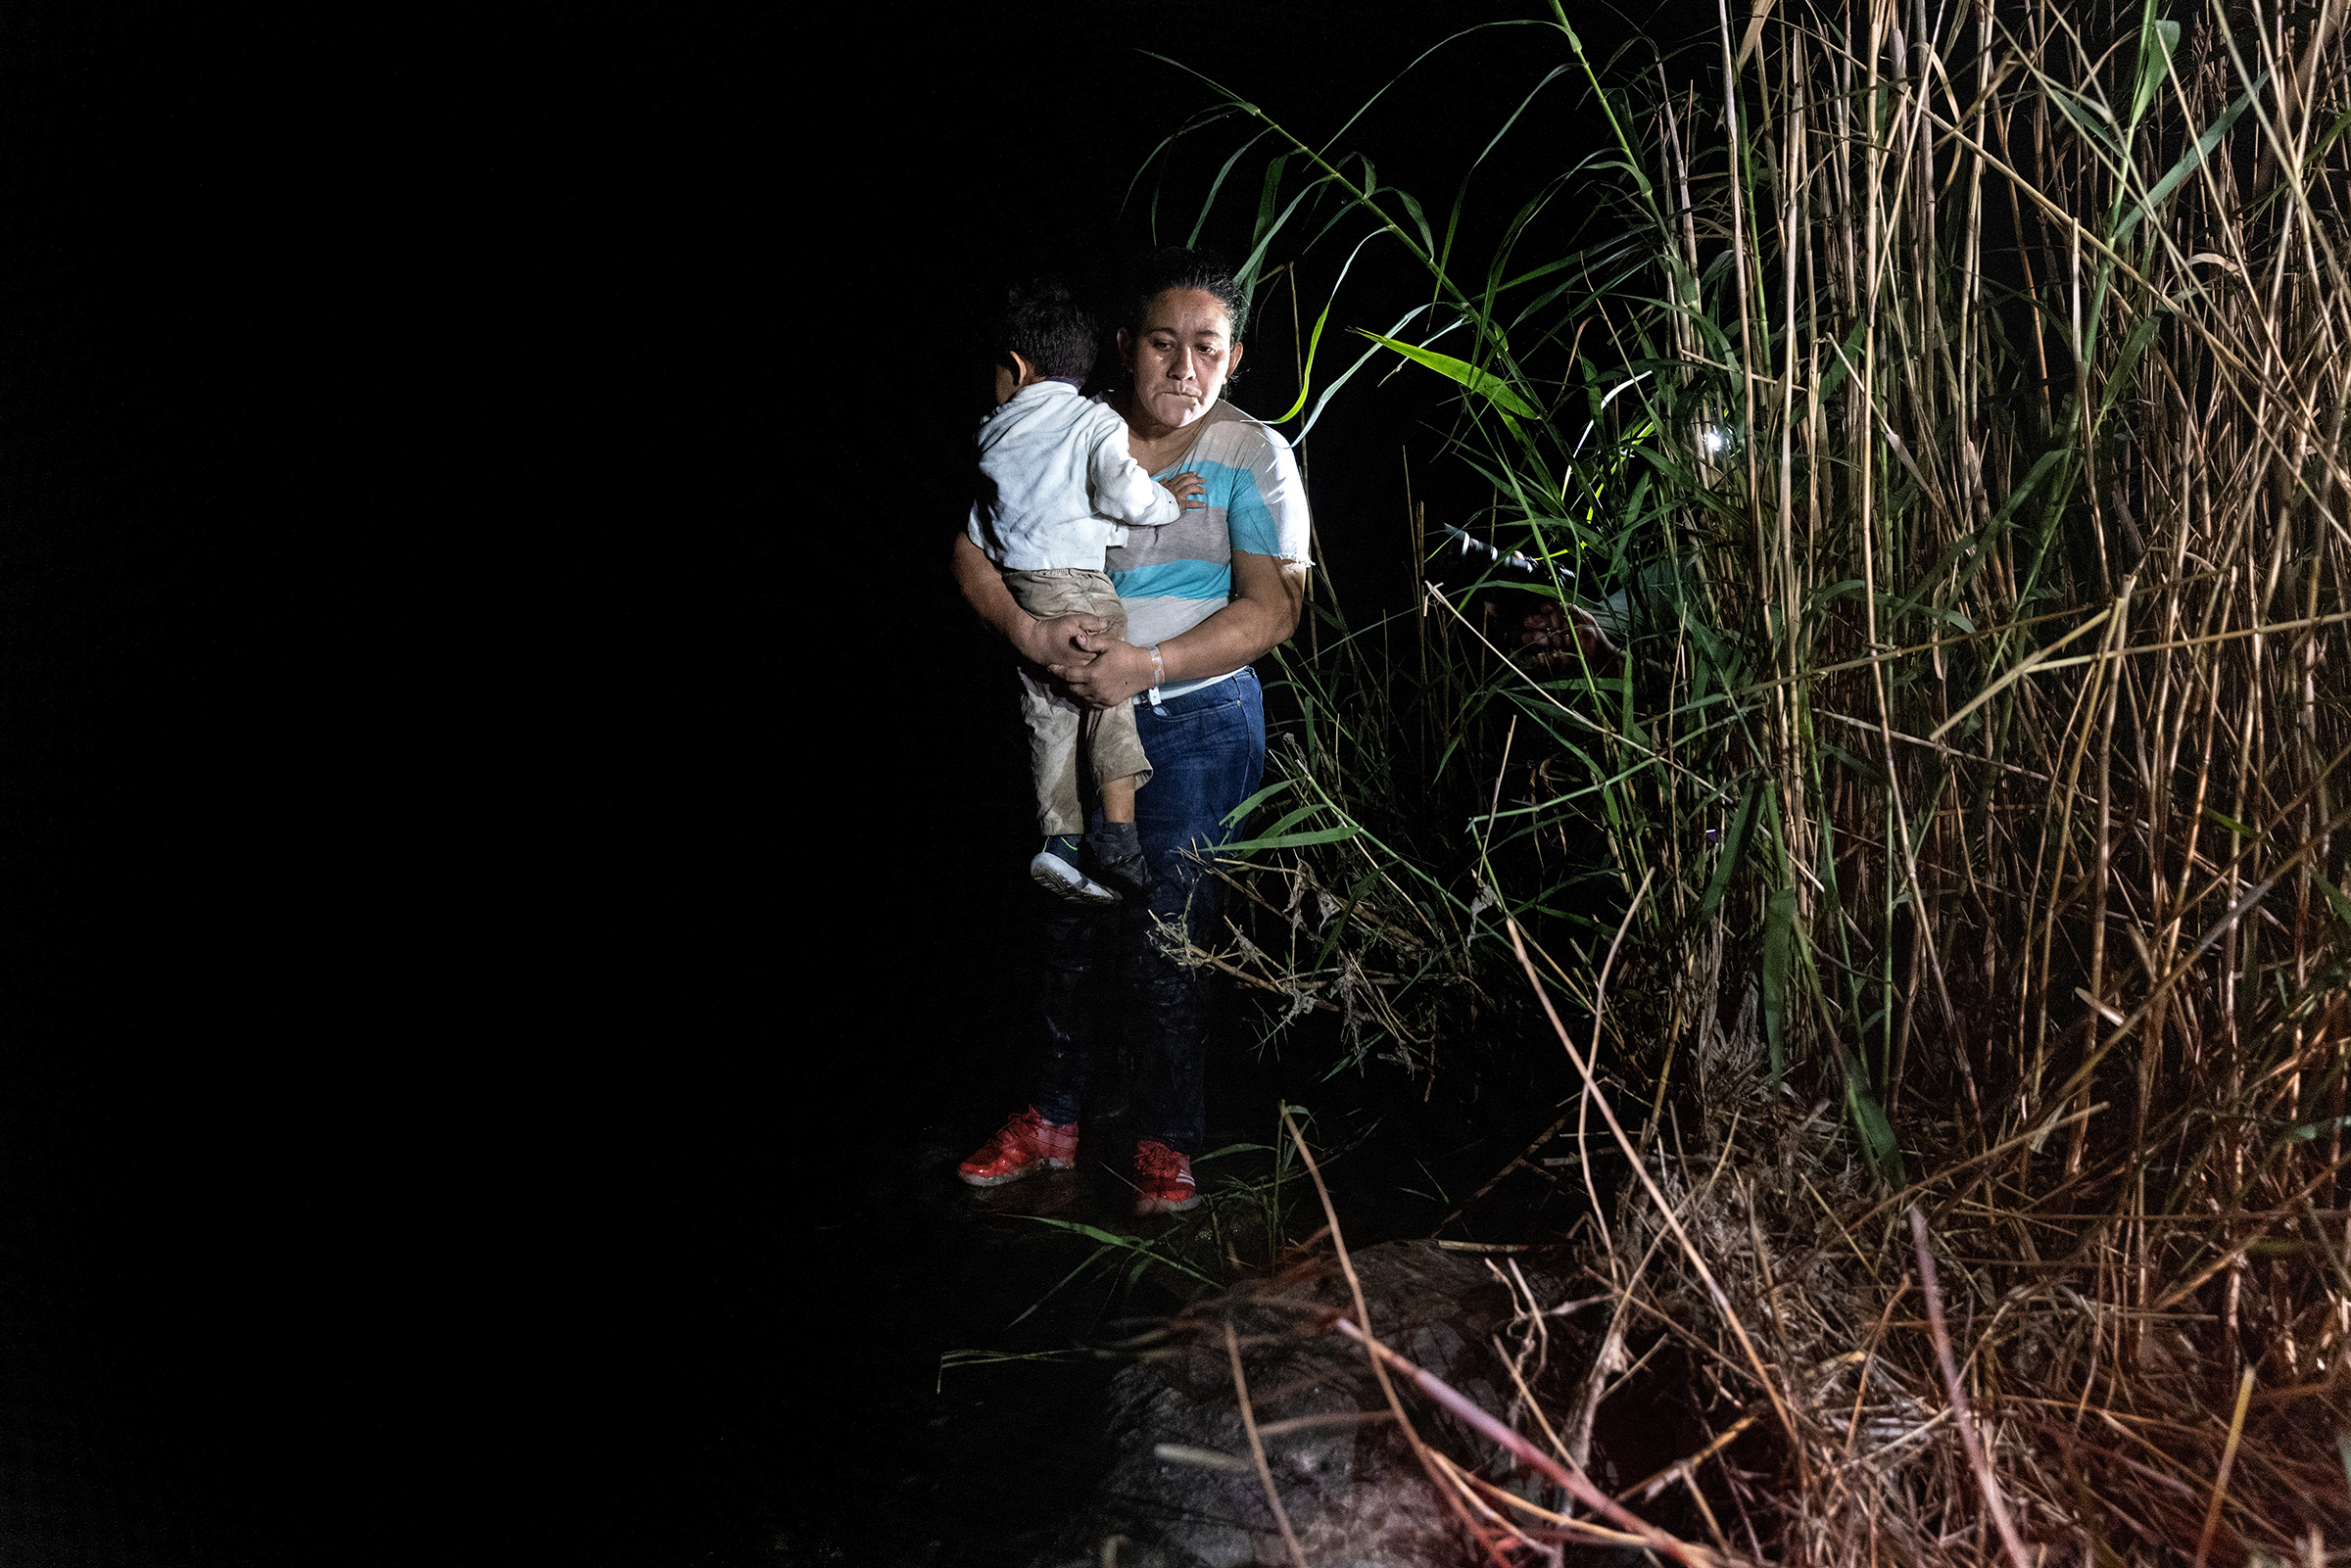 A mother holds her son on the bank of the Rio Grande in Roma, Texas, after being smuggled across the U.S.-Mexico border on April 14, 2021.